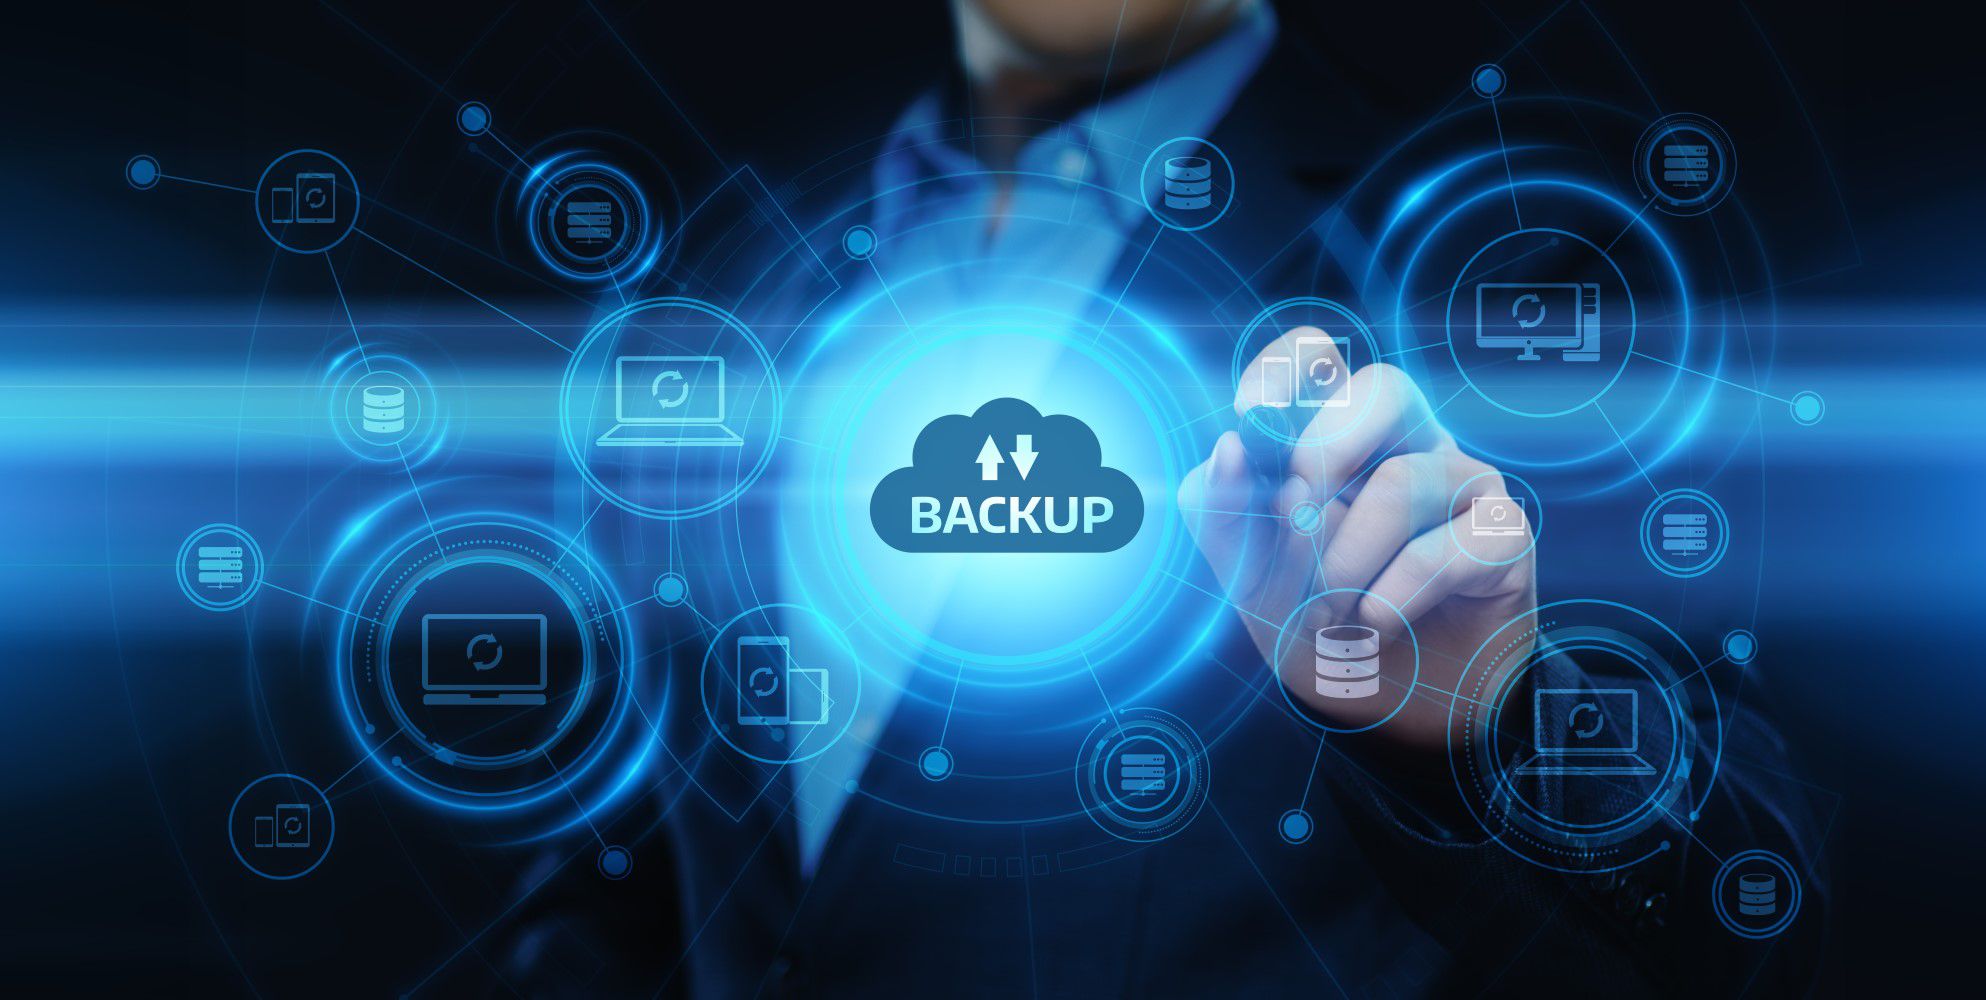 data backup and recovery services